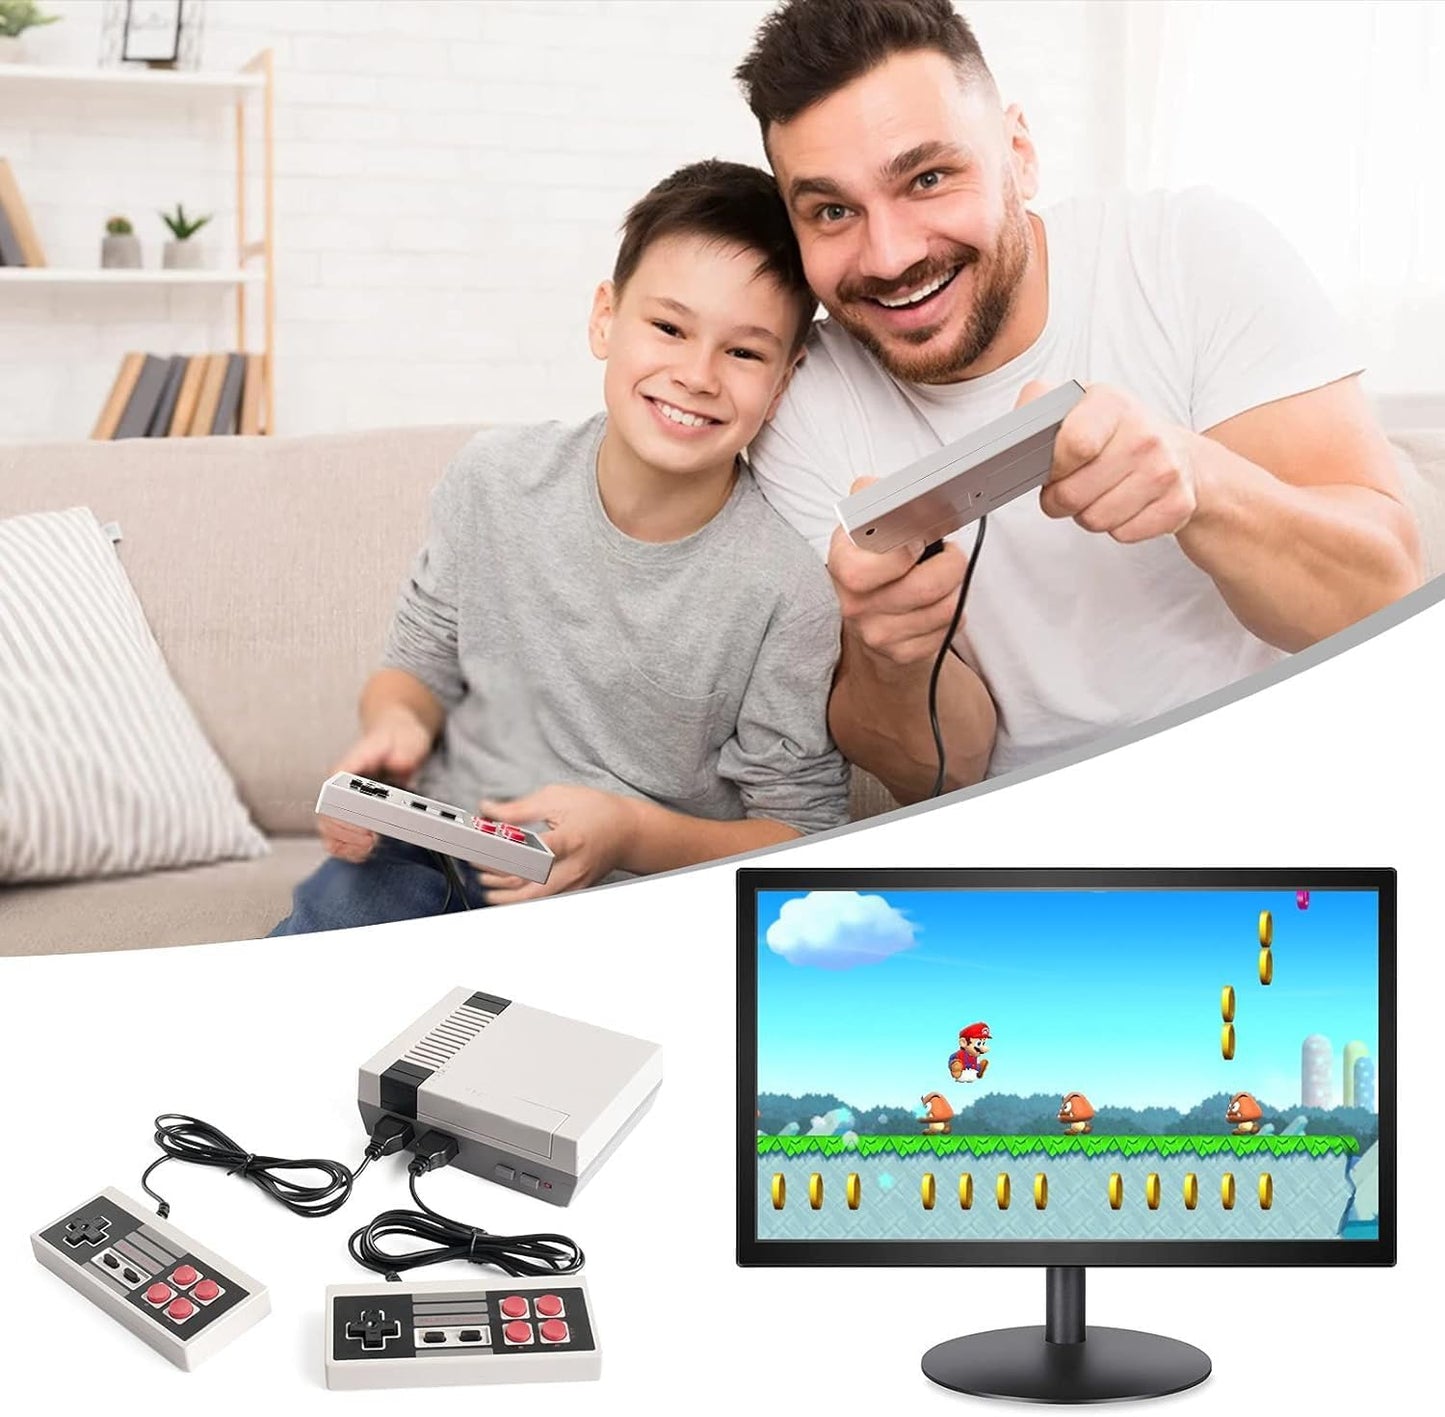 Classic Mini Game Consoles Retro Family TV Game Console Built-in 300 TV Video Game With Dual Controller Shipping from UK local warehouse